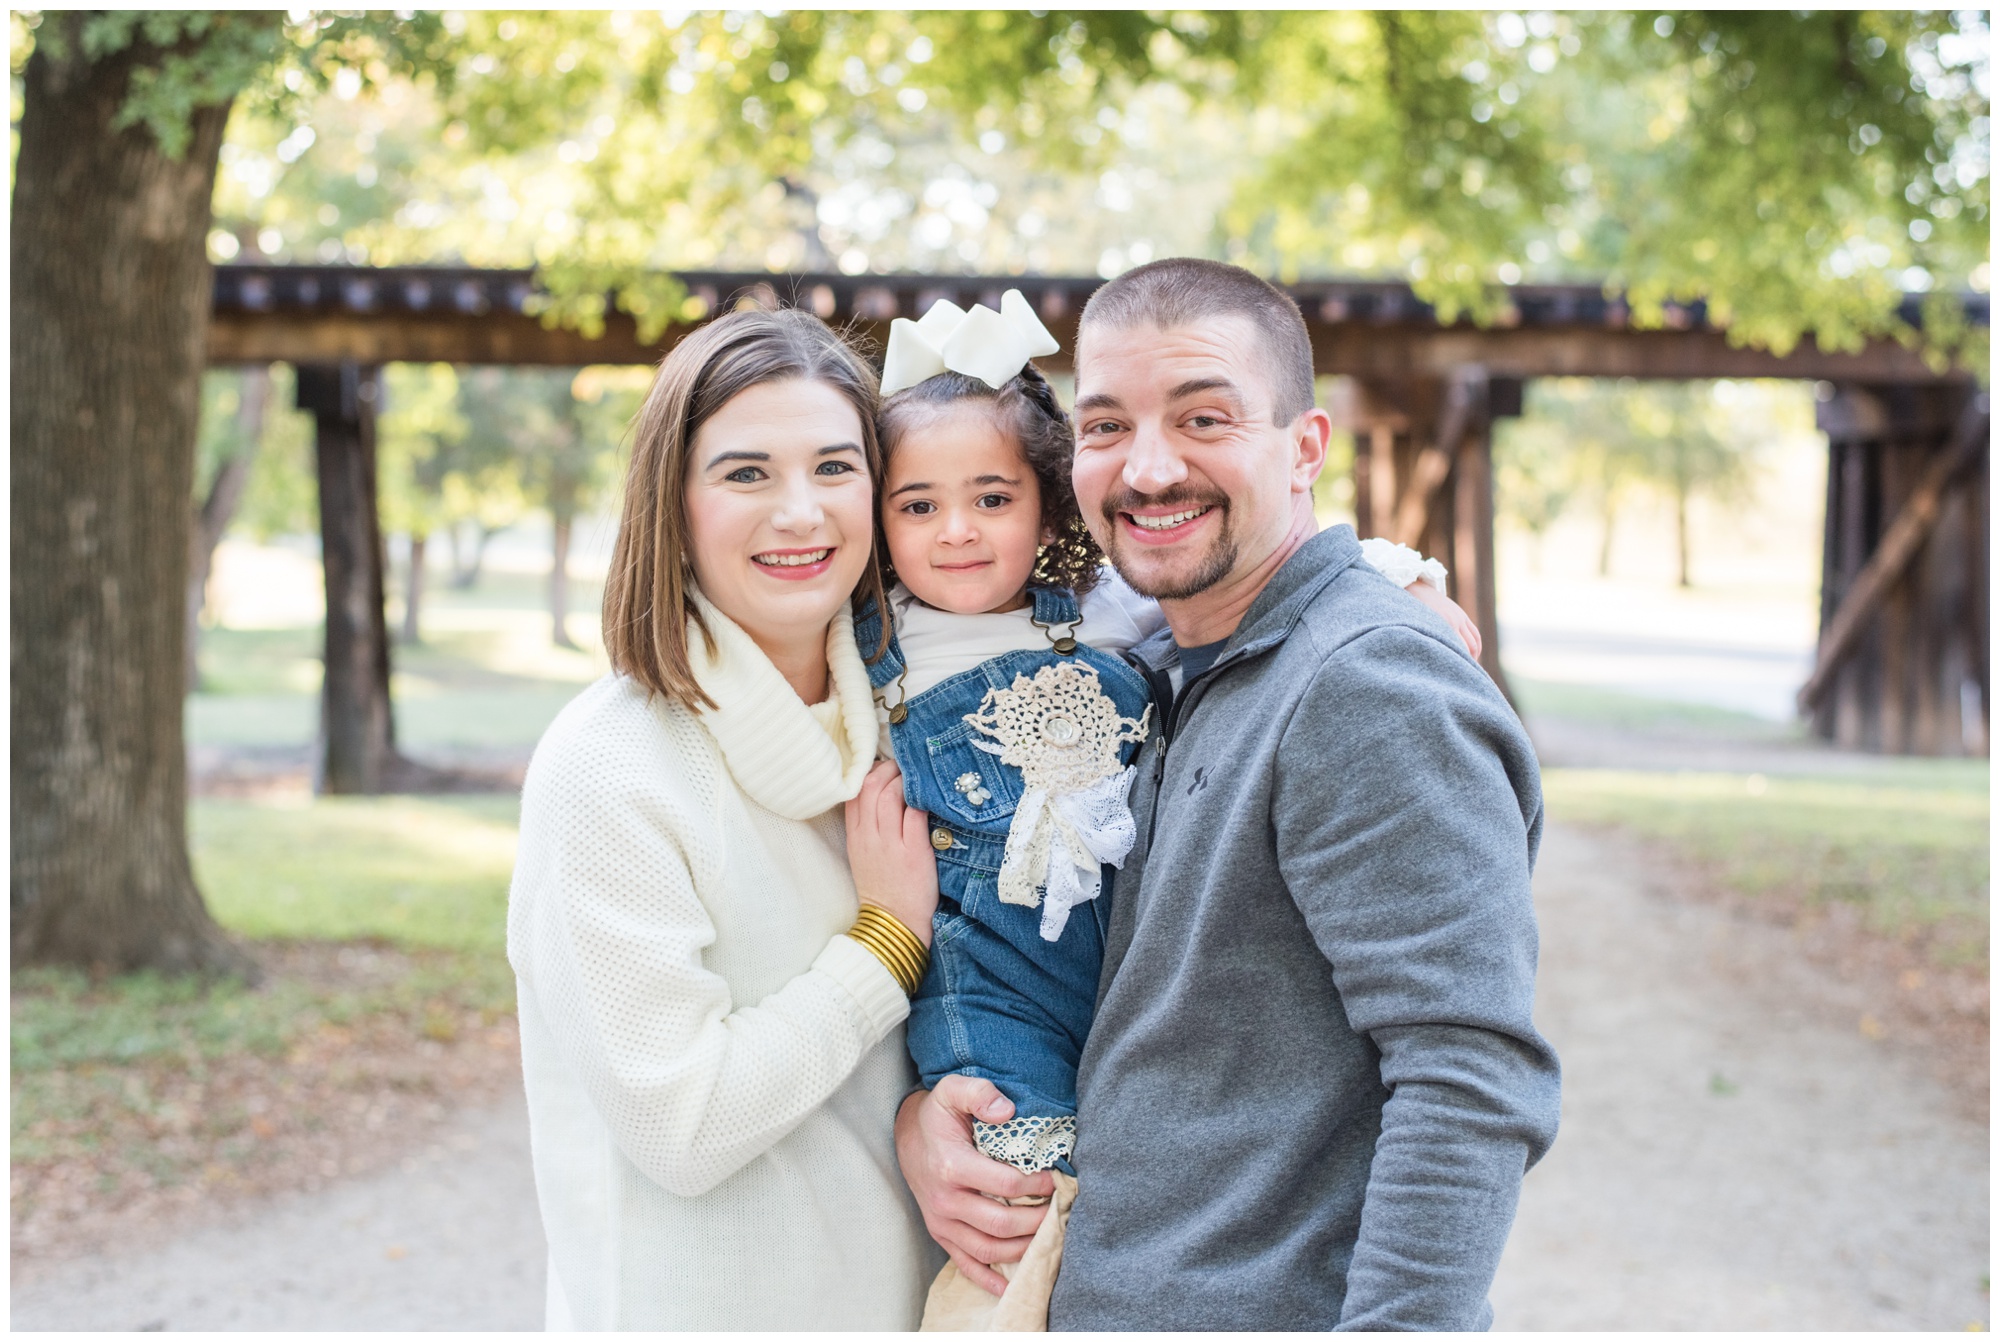 Trinity Park Family Session | Fort Worth Family Photographer | Fort Worth Photographer | Lauren Grimes Photography